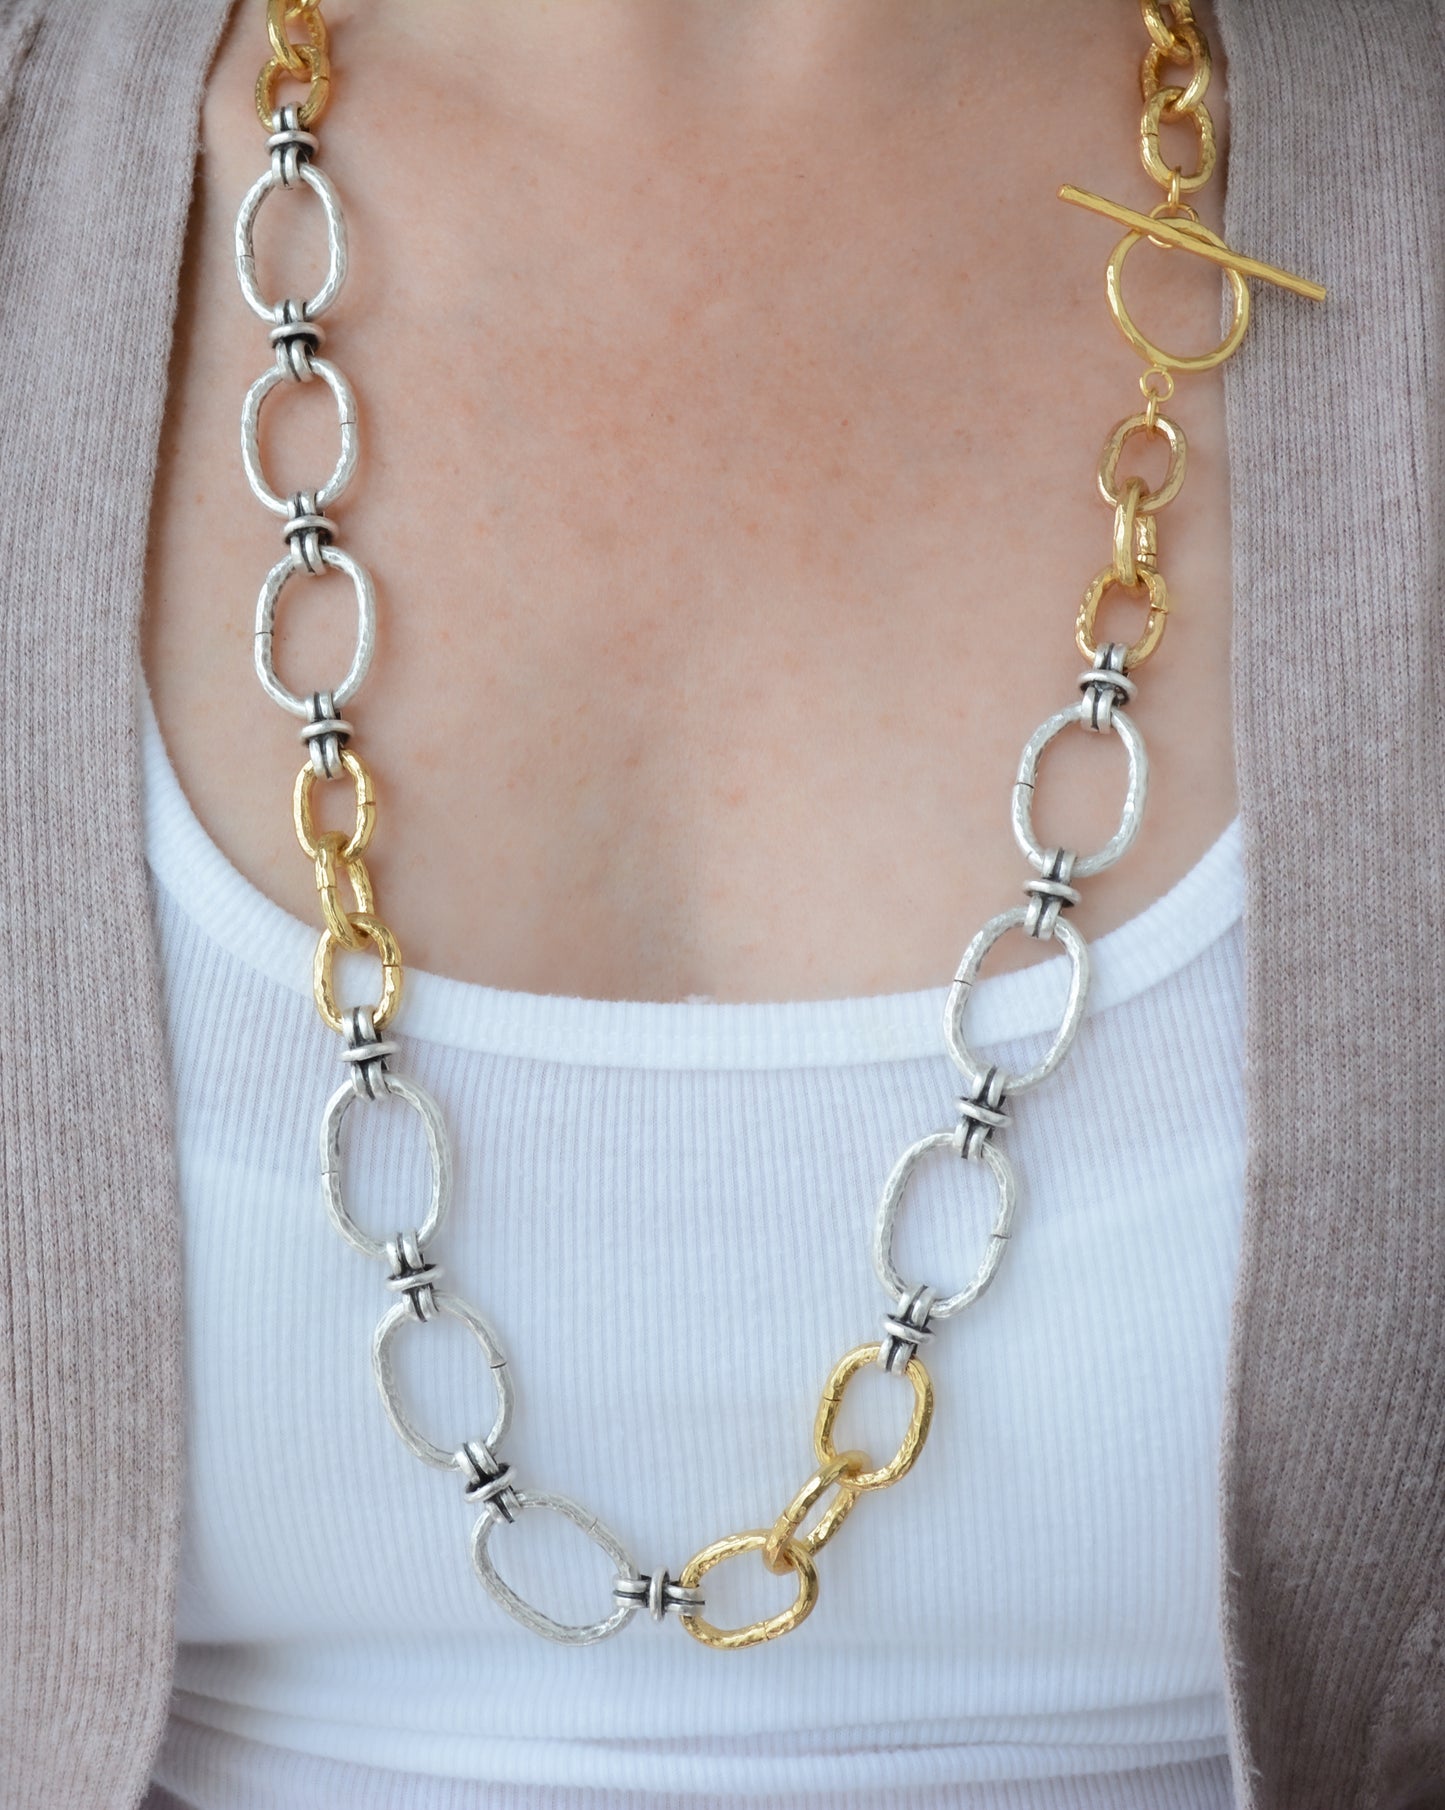 Gold and Rhodium Plated Handmade Link Chain Necklace